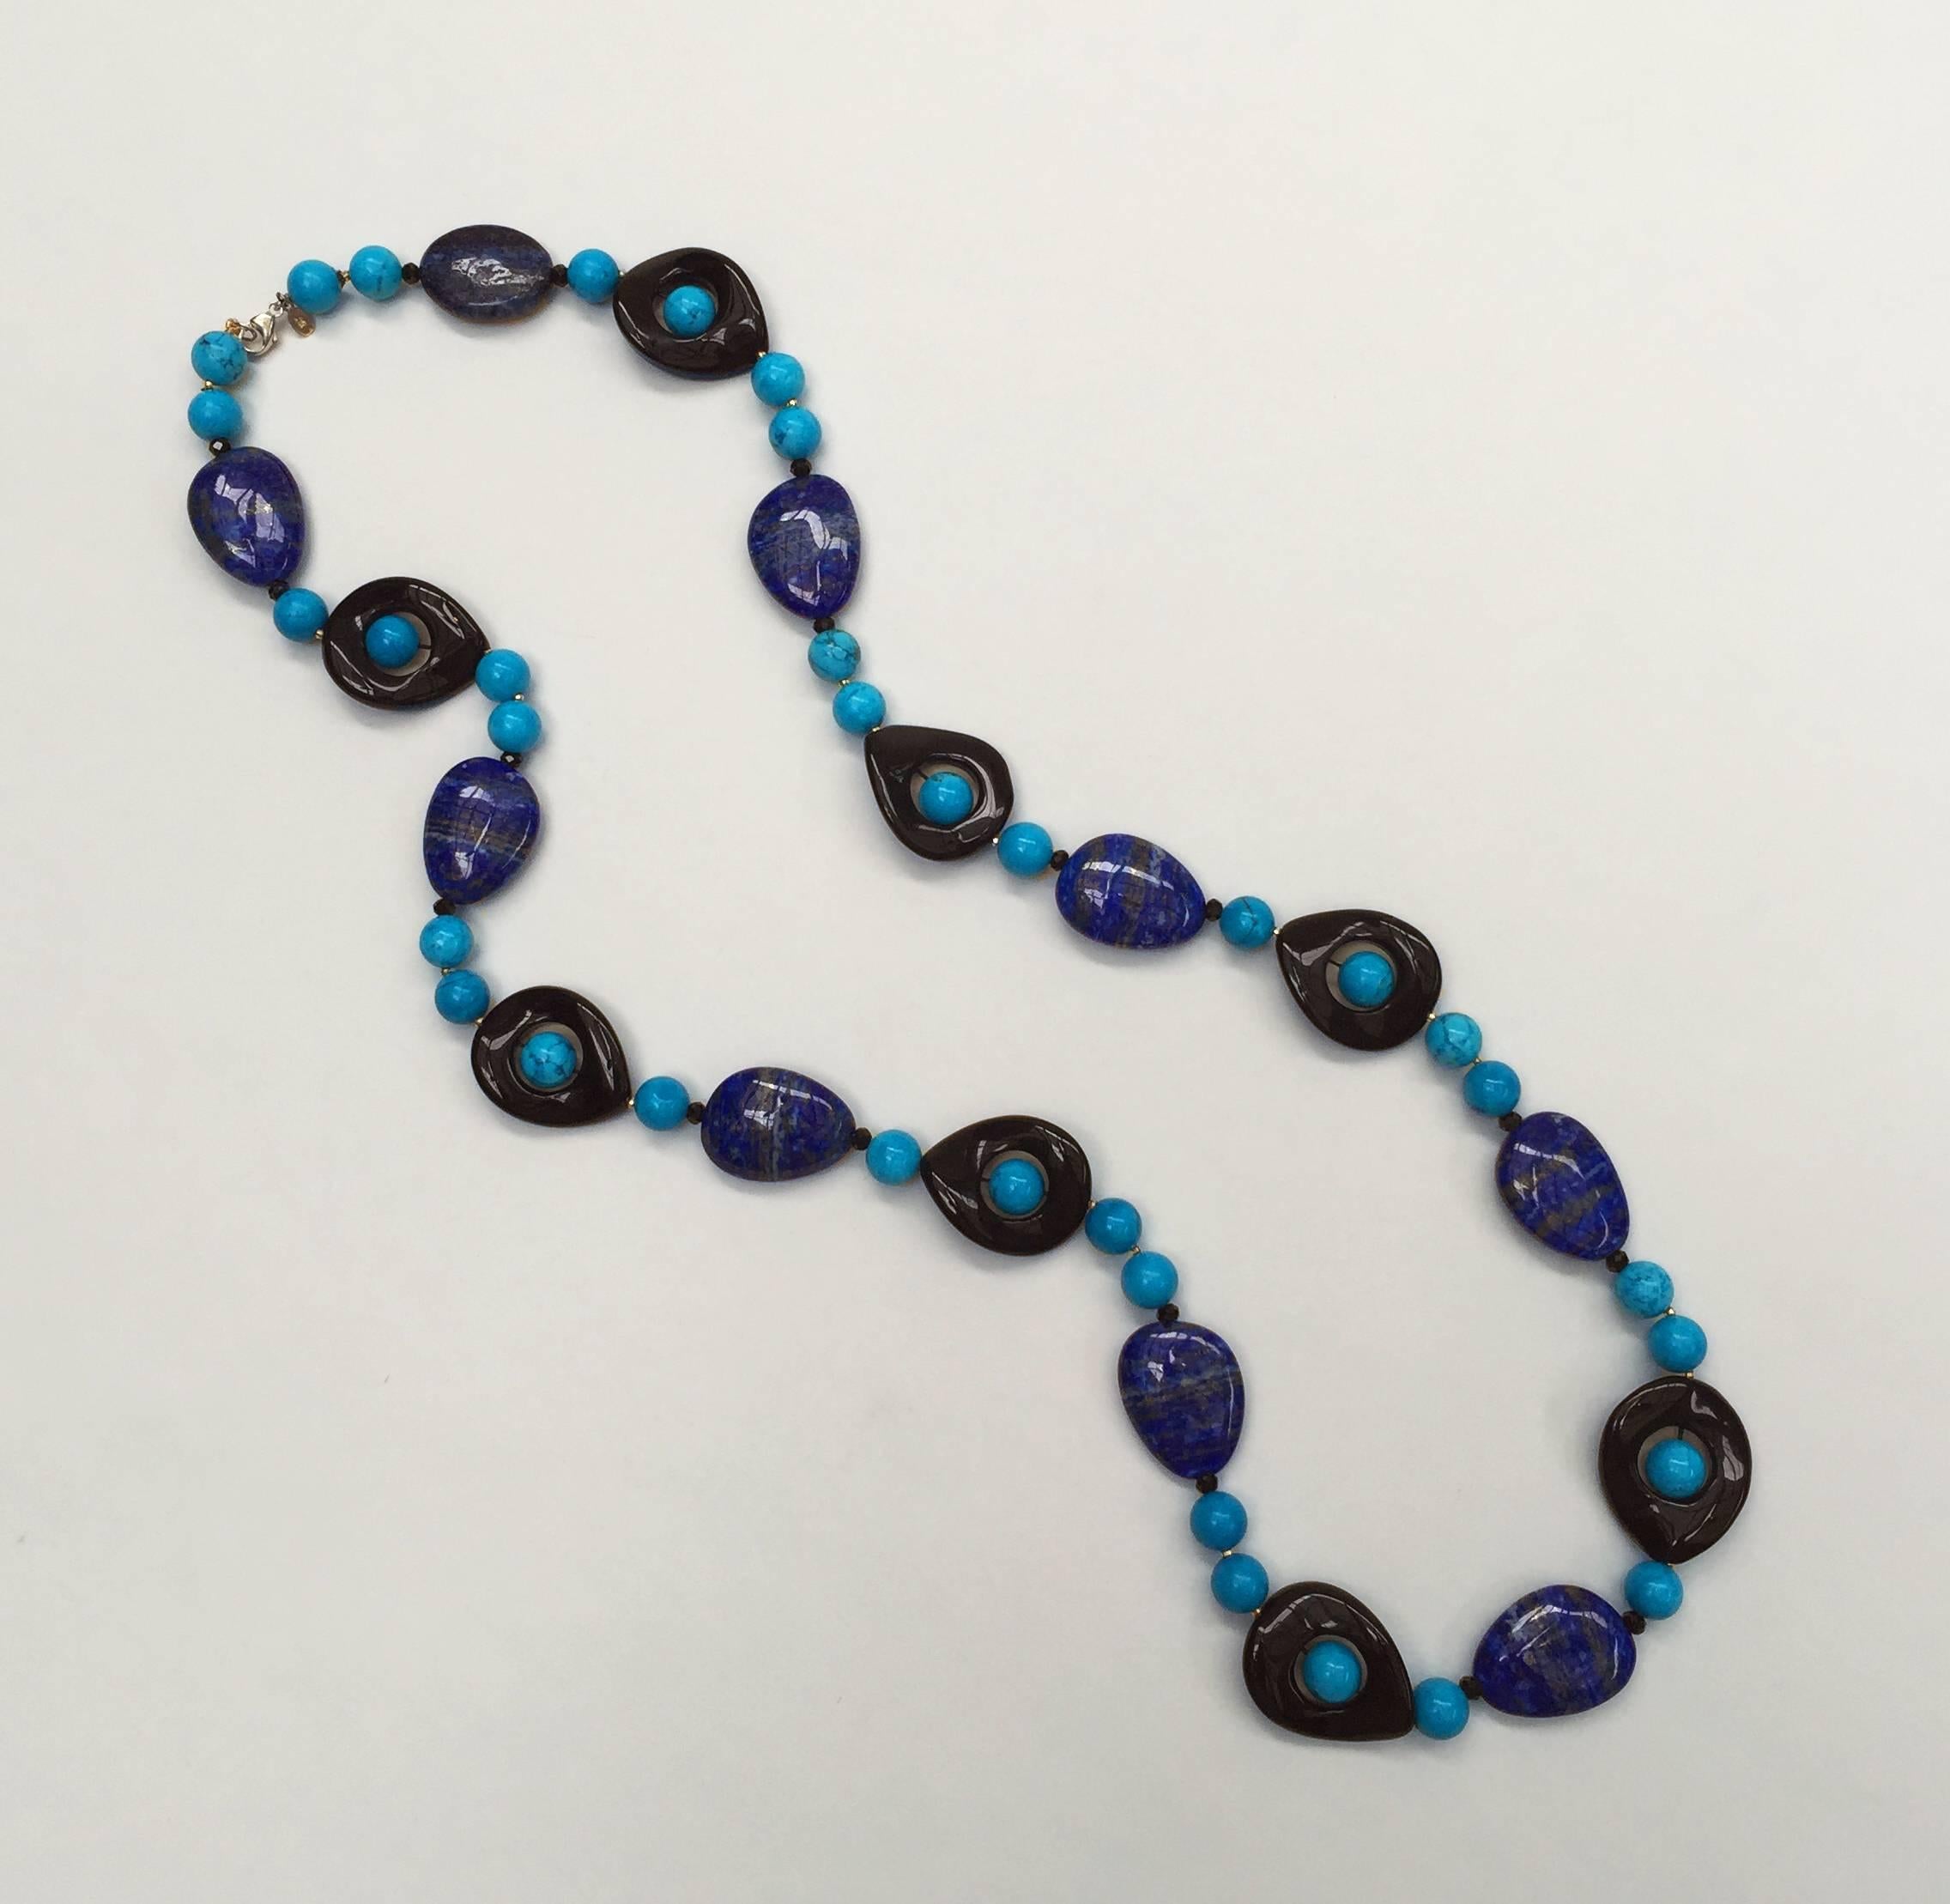 Women's Turquoise, Lapis Lazuli and Onyx Necklace with 14 Karat Yellow Gold Clasp